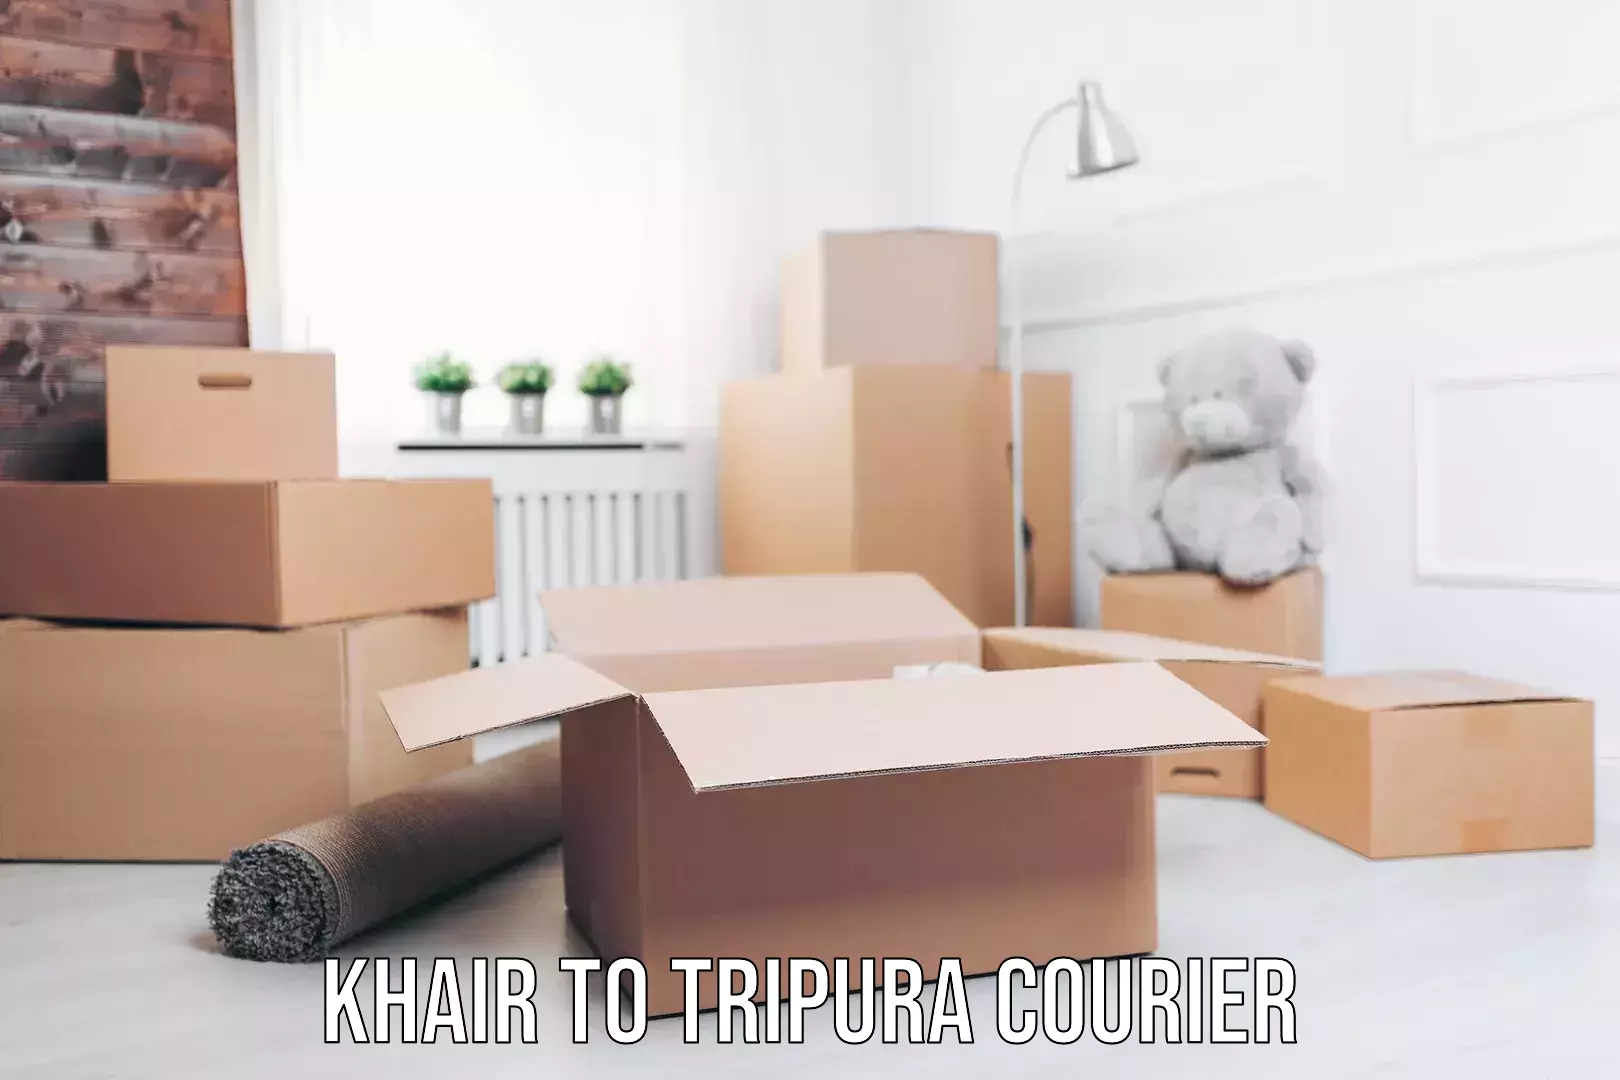 Full-service relocation in Khair to Tripura